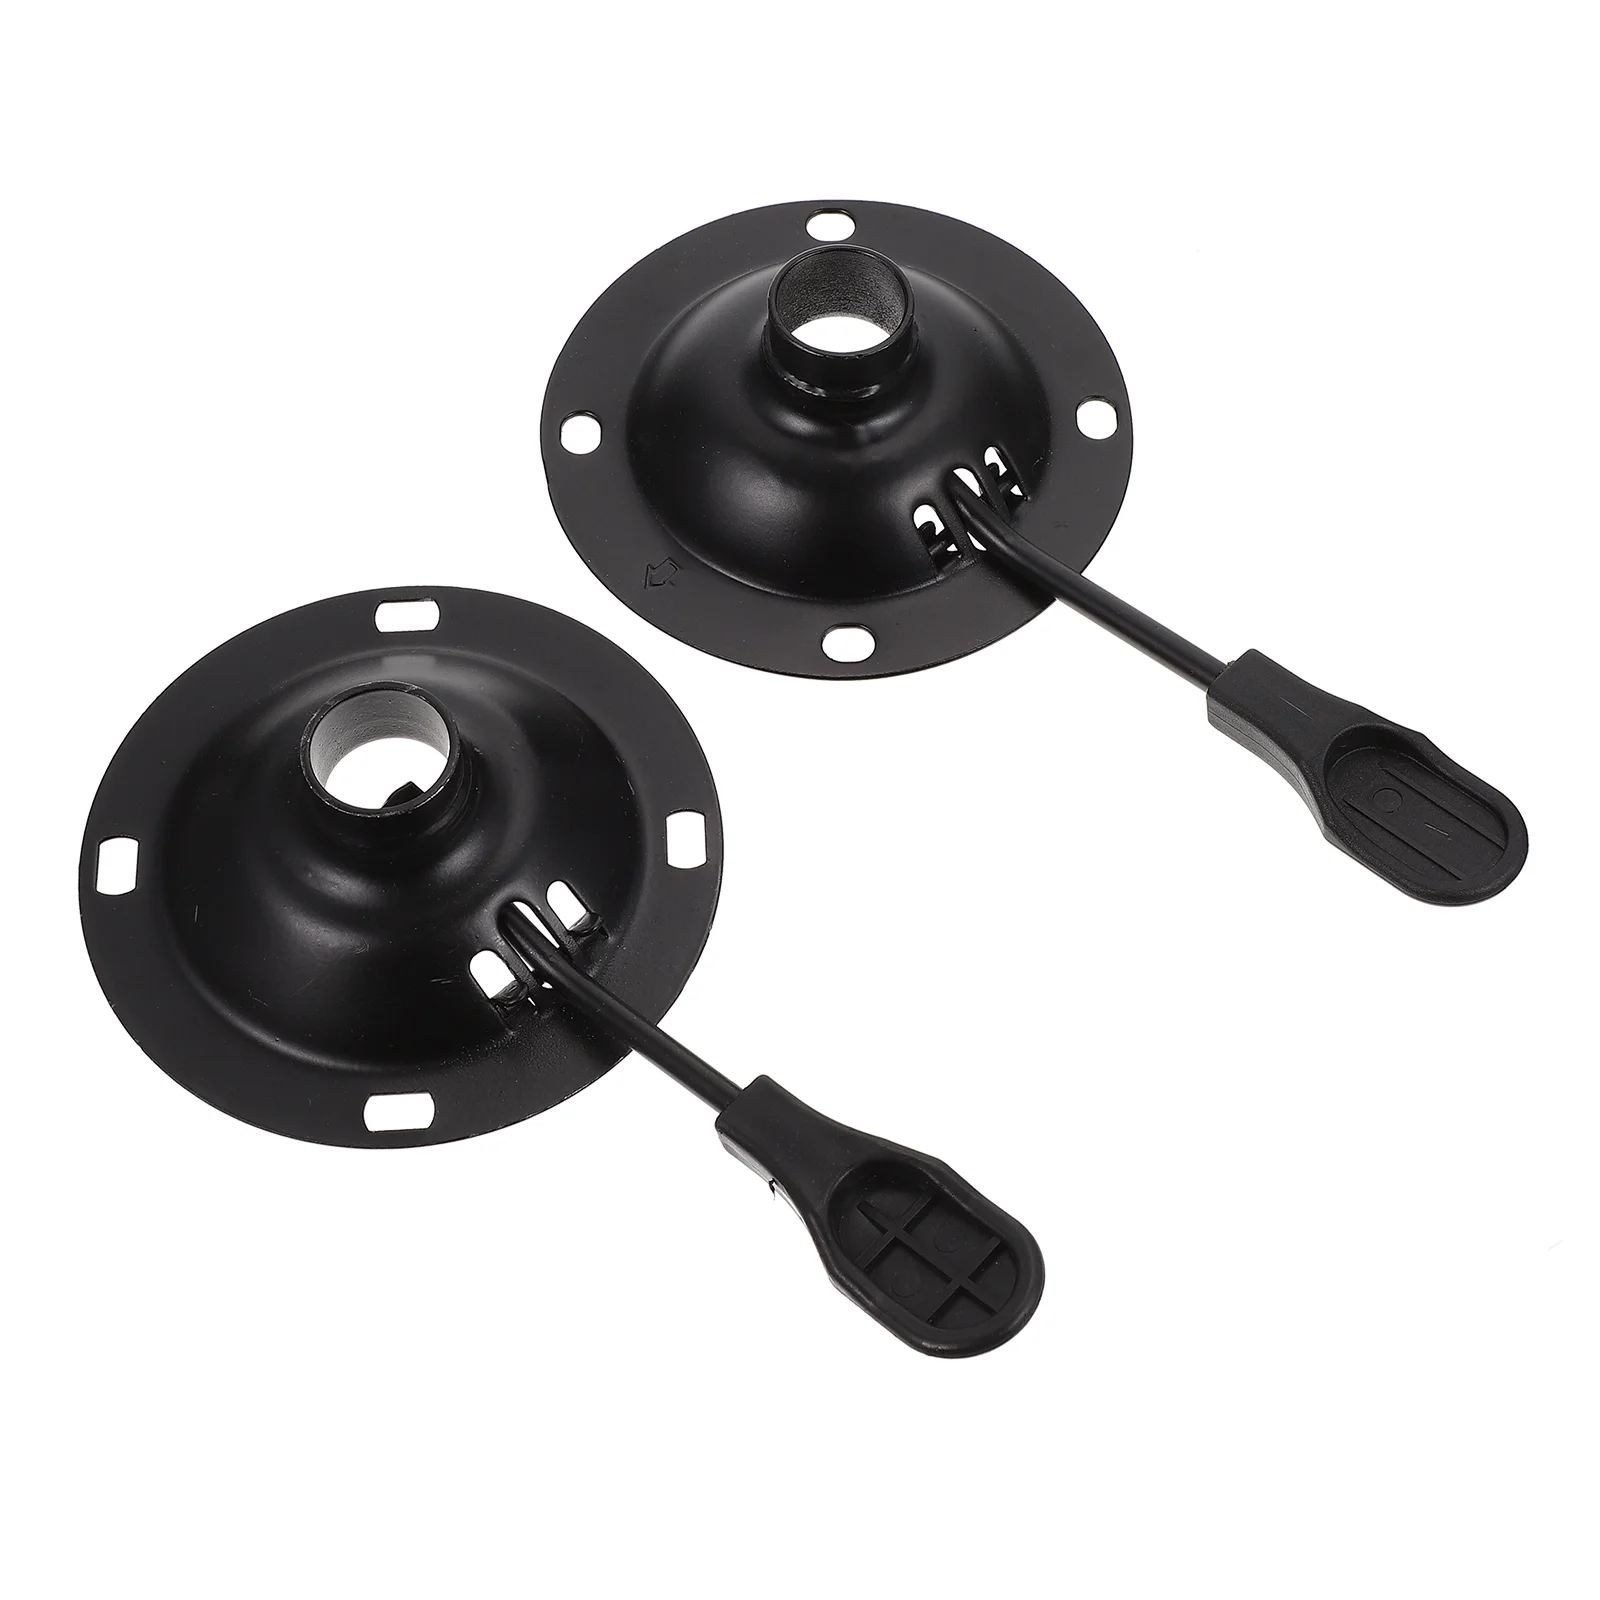 

2 Pcs Chair Chassis Fittings Ironware Metals Trays Premium Perfect Mountings Round Swivel Hardware Accessories Durable